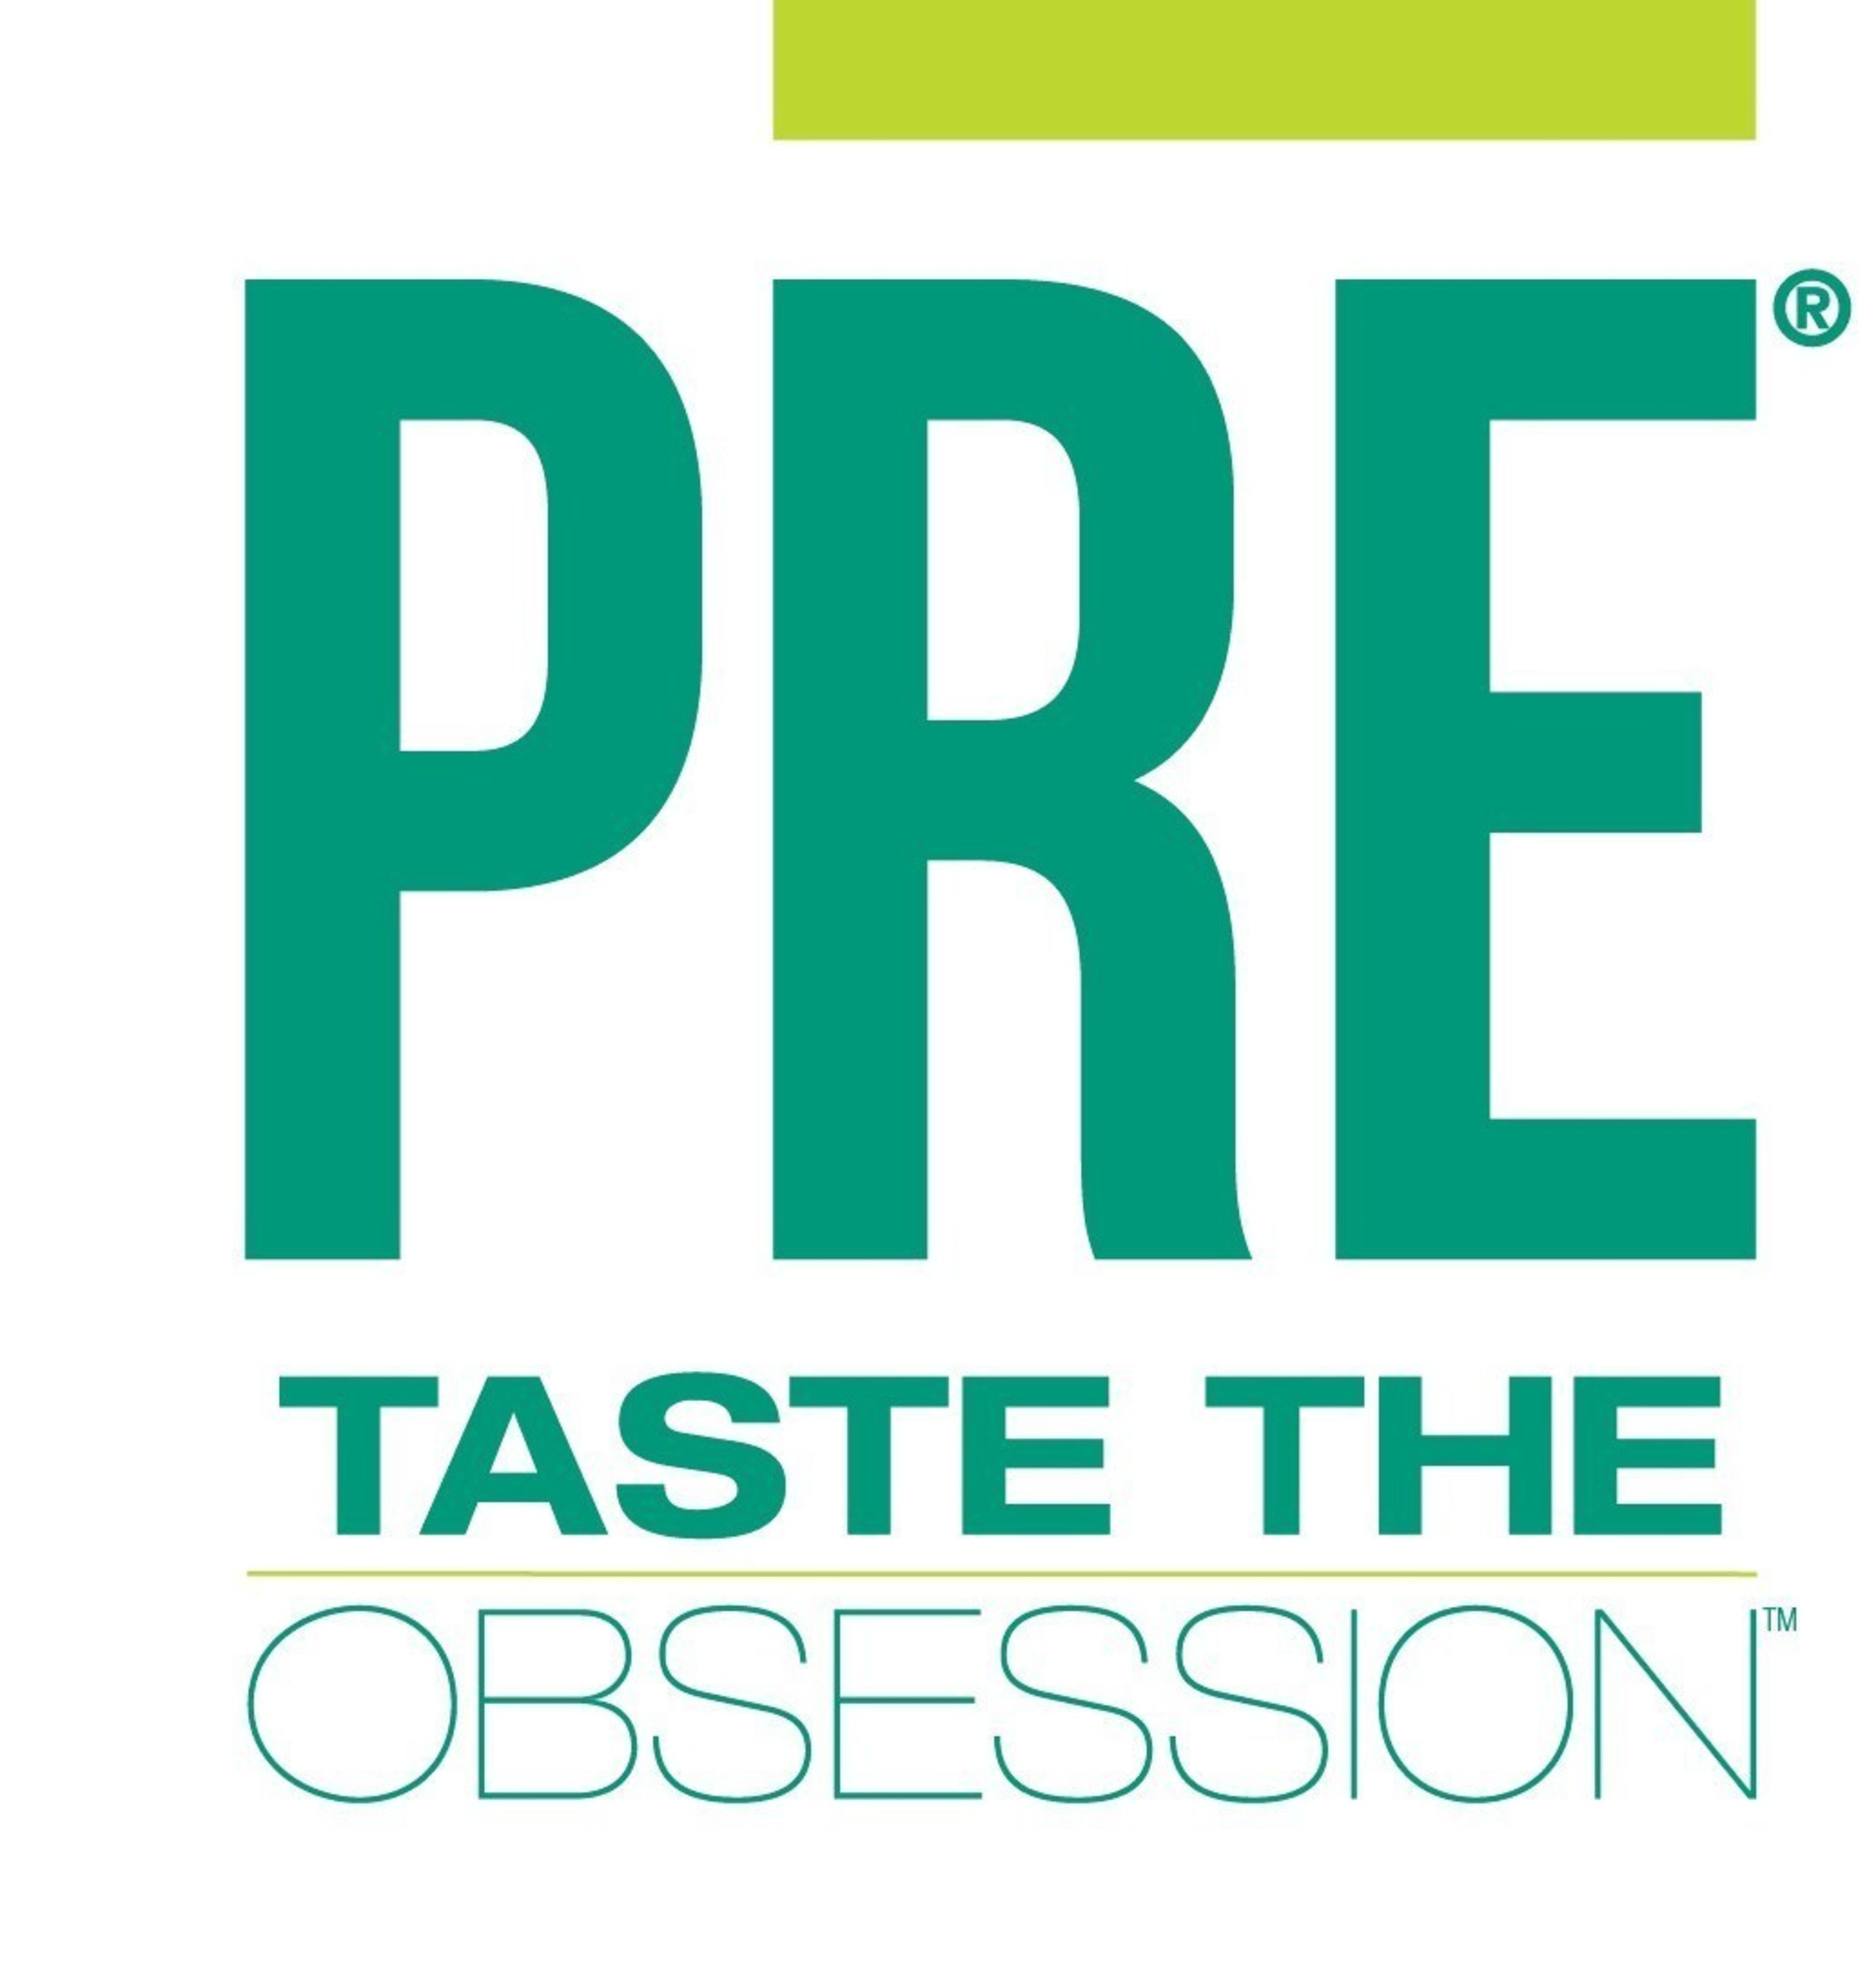 PRE(R) Brands Launches Responsibly-Sourced, Obsessively Curated 100% Grass Fed Beef, Invites Consumers to Taste the Obsession